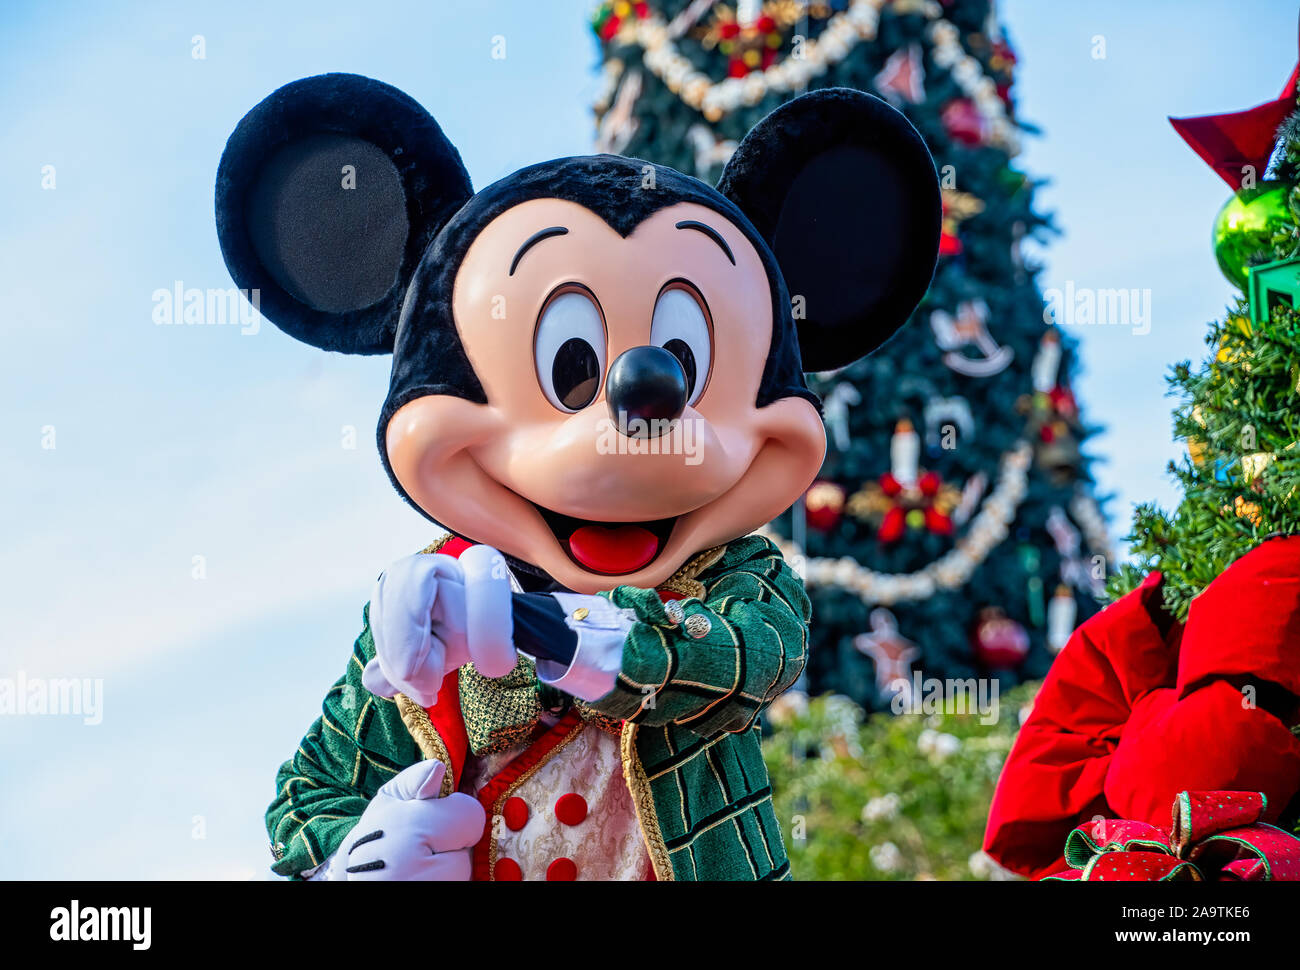 Mickey Mouse in Christmas outfits in the Christmastime Parade Stock Photo